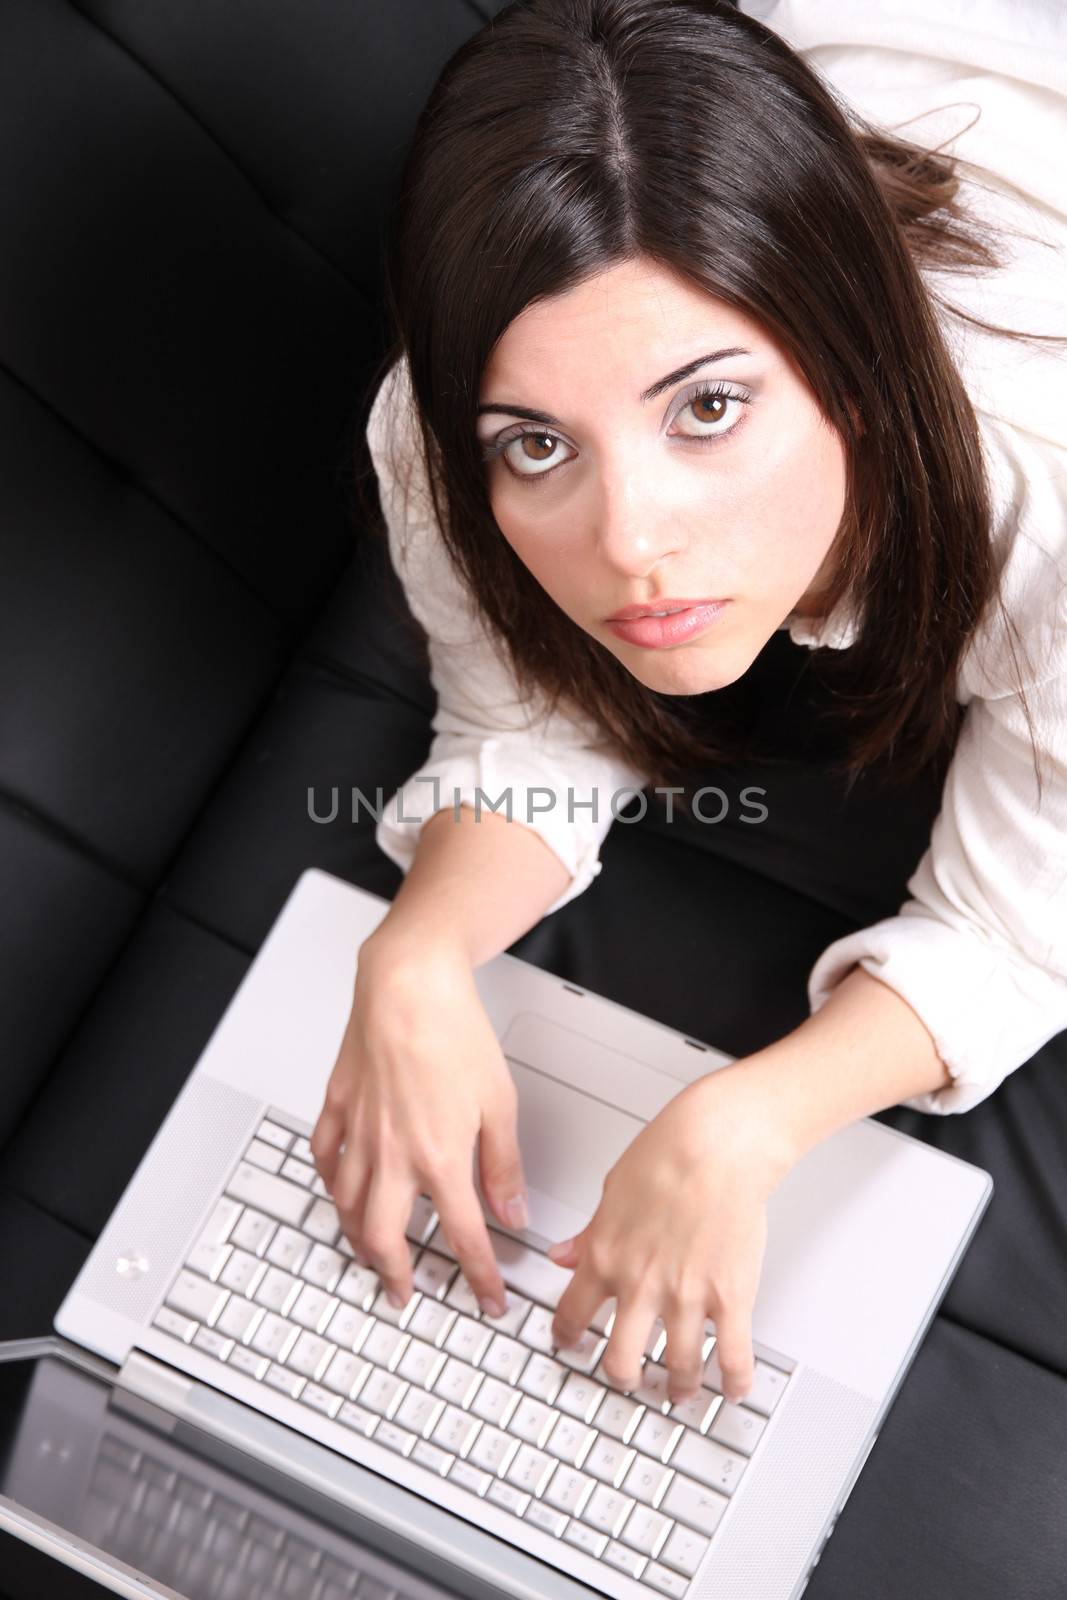 A young woman surfing on the Internet with a Laptop.  
